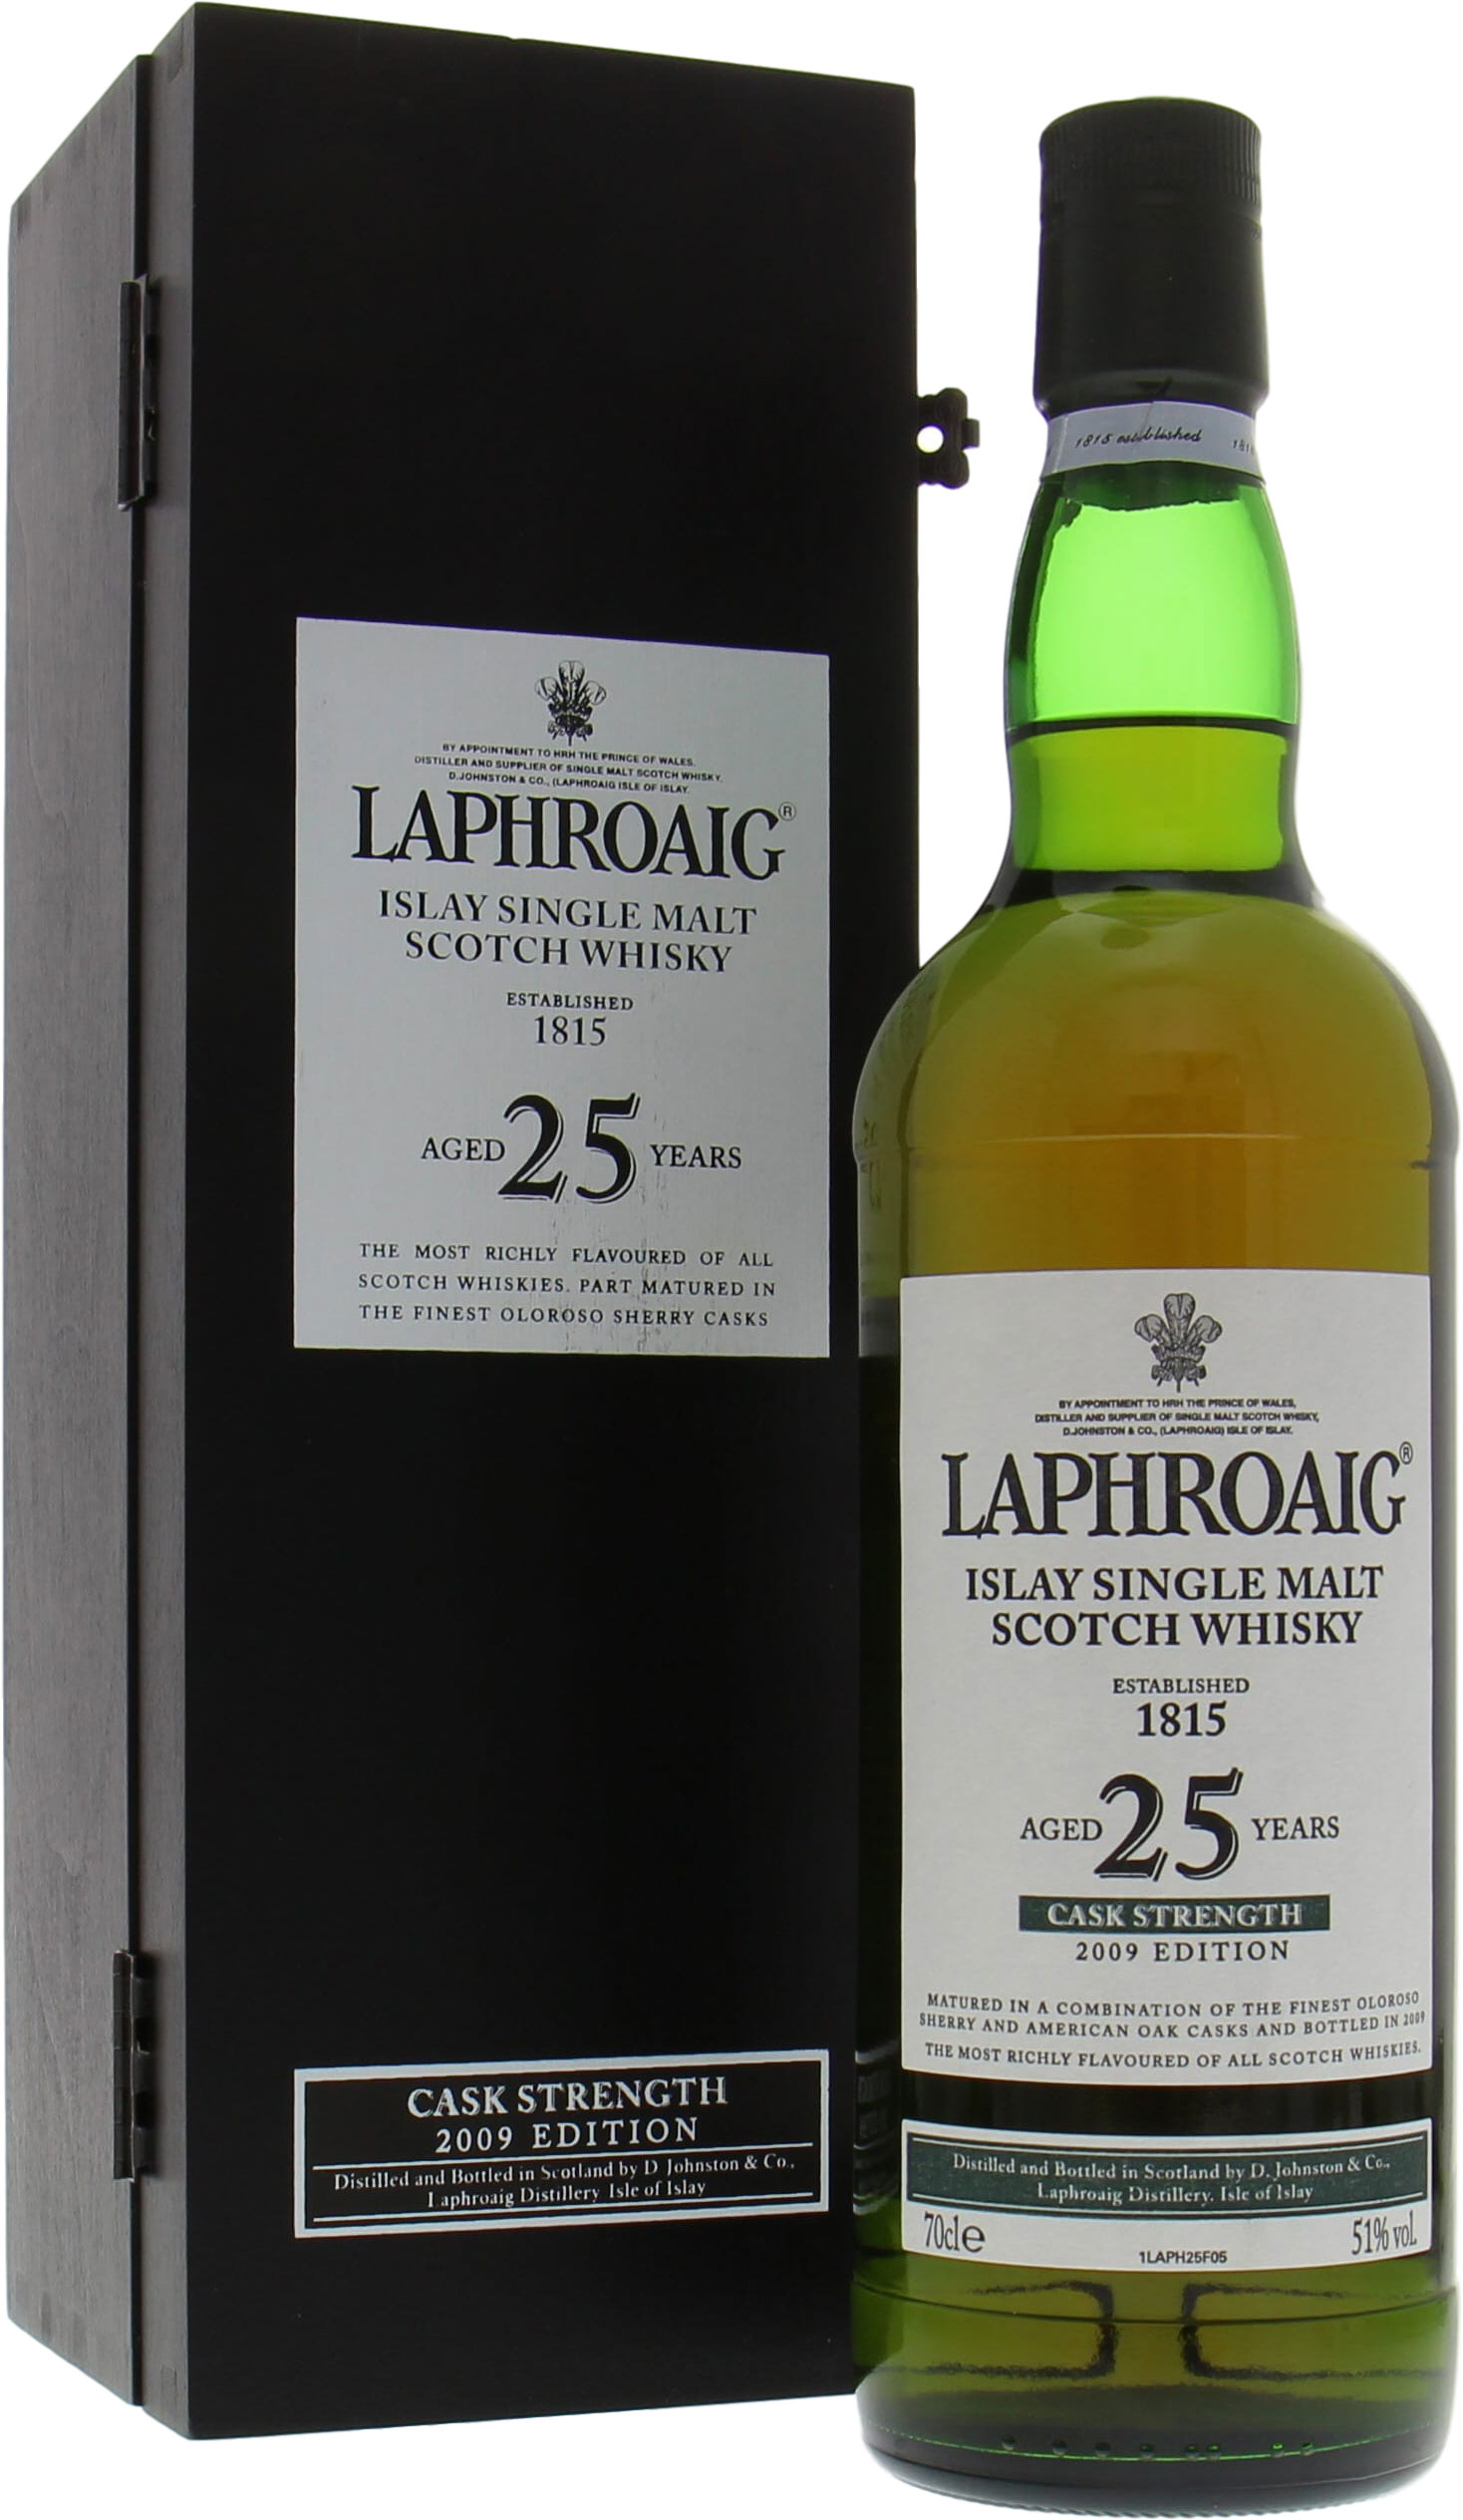 Laphroaig - 25 Years Old Cask Strength Edition 51% 2009